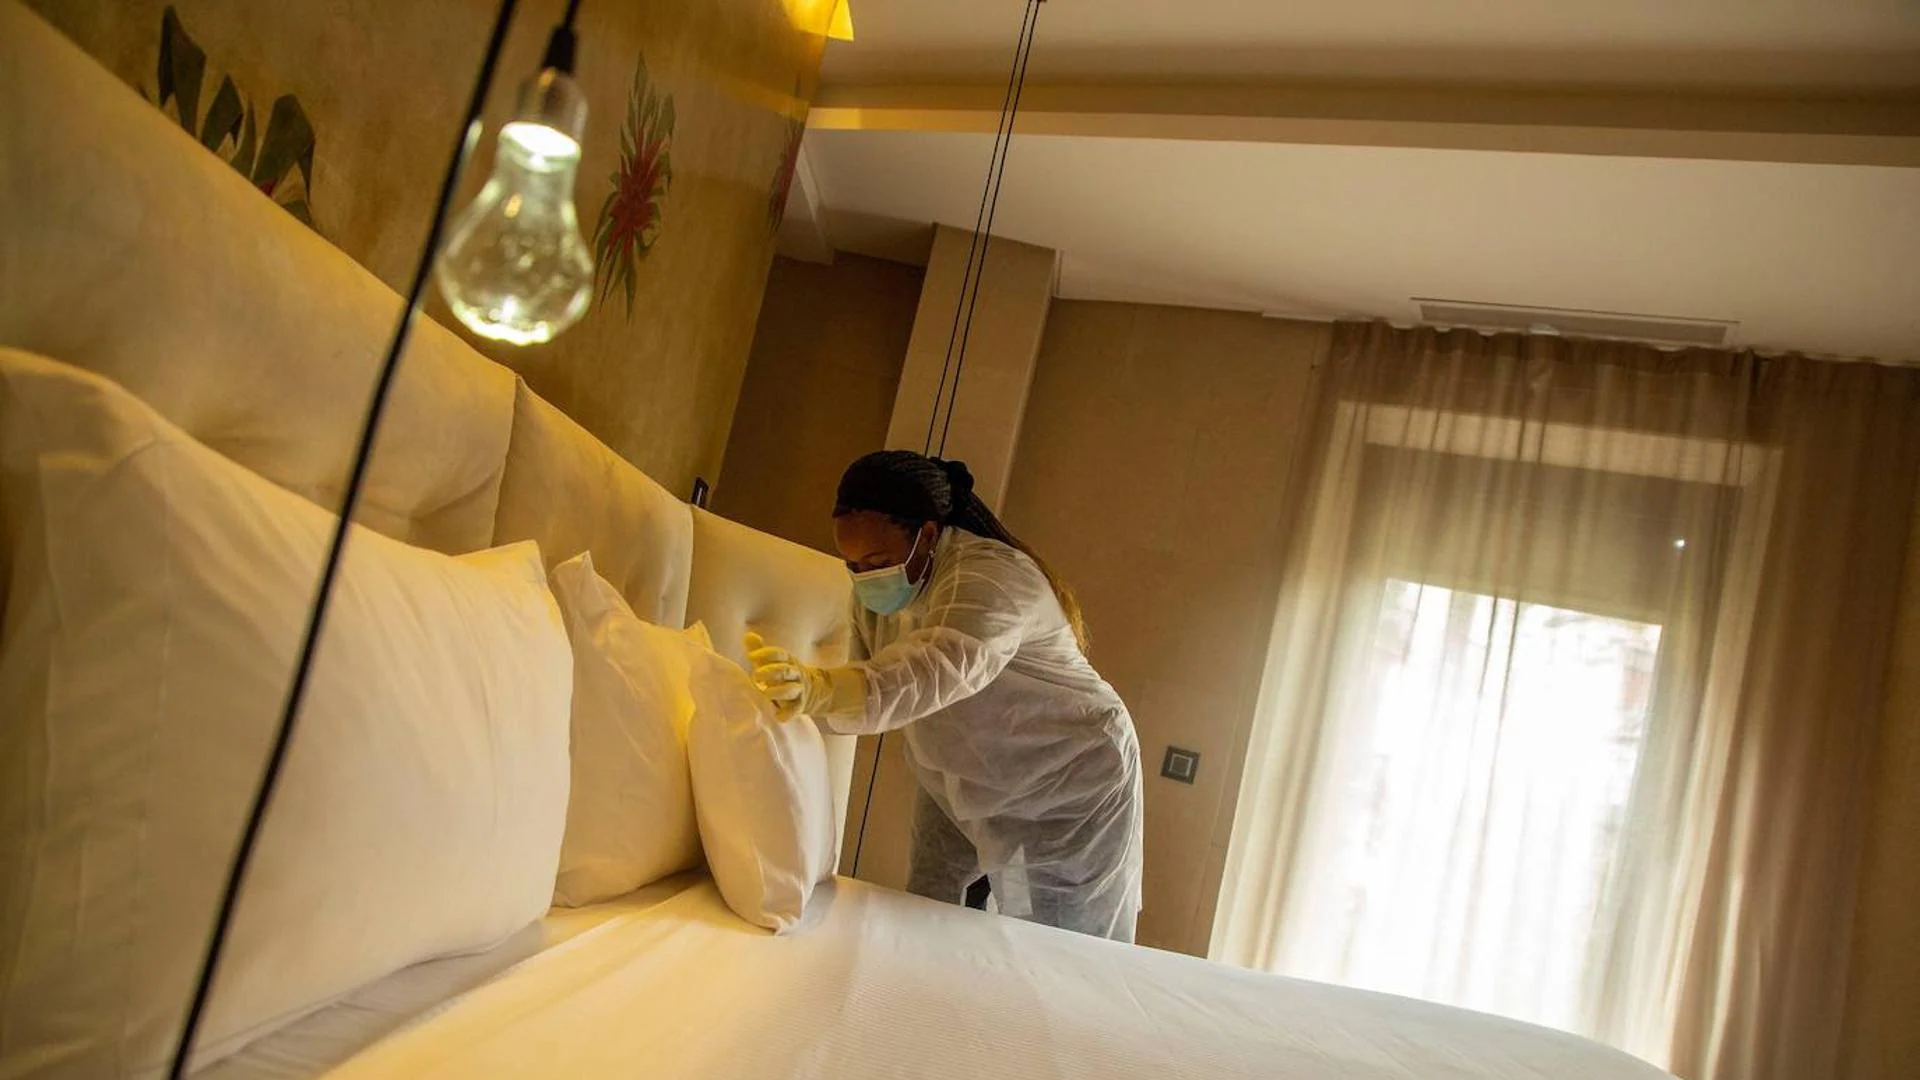 A tourist sues a hotel in China after sleeping with a dead body under his bed